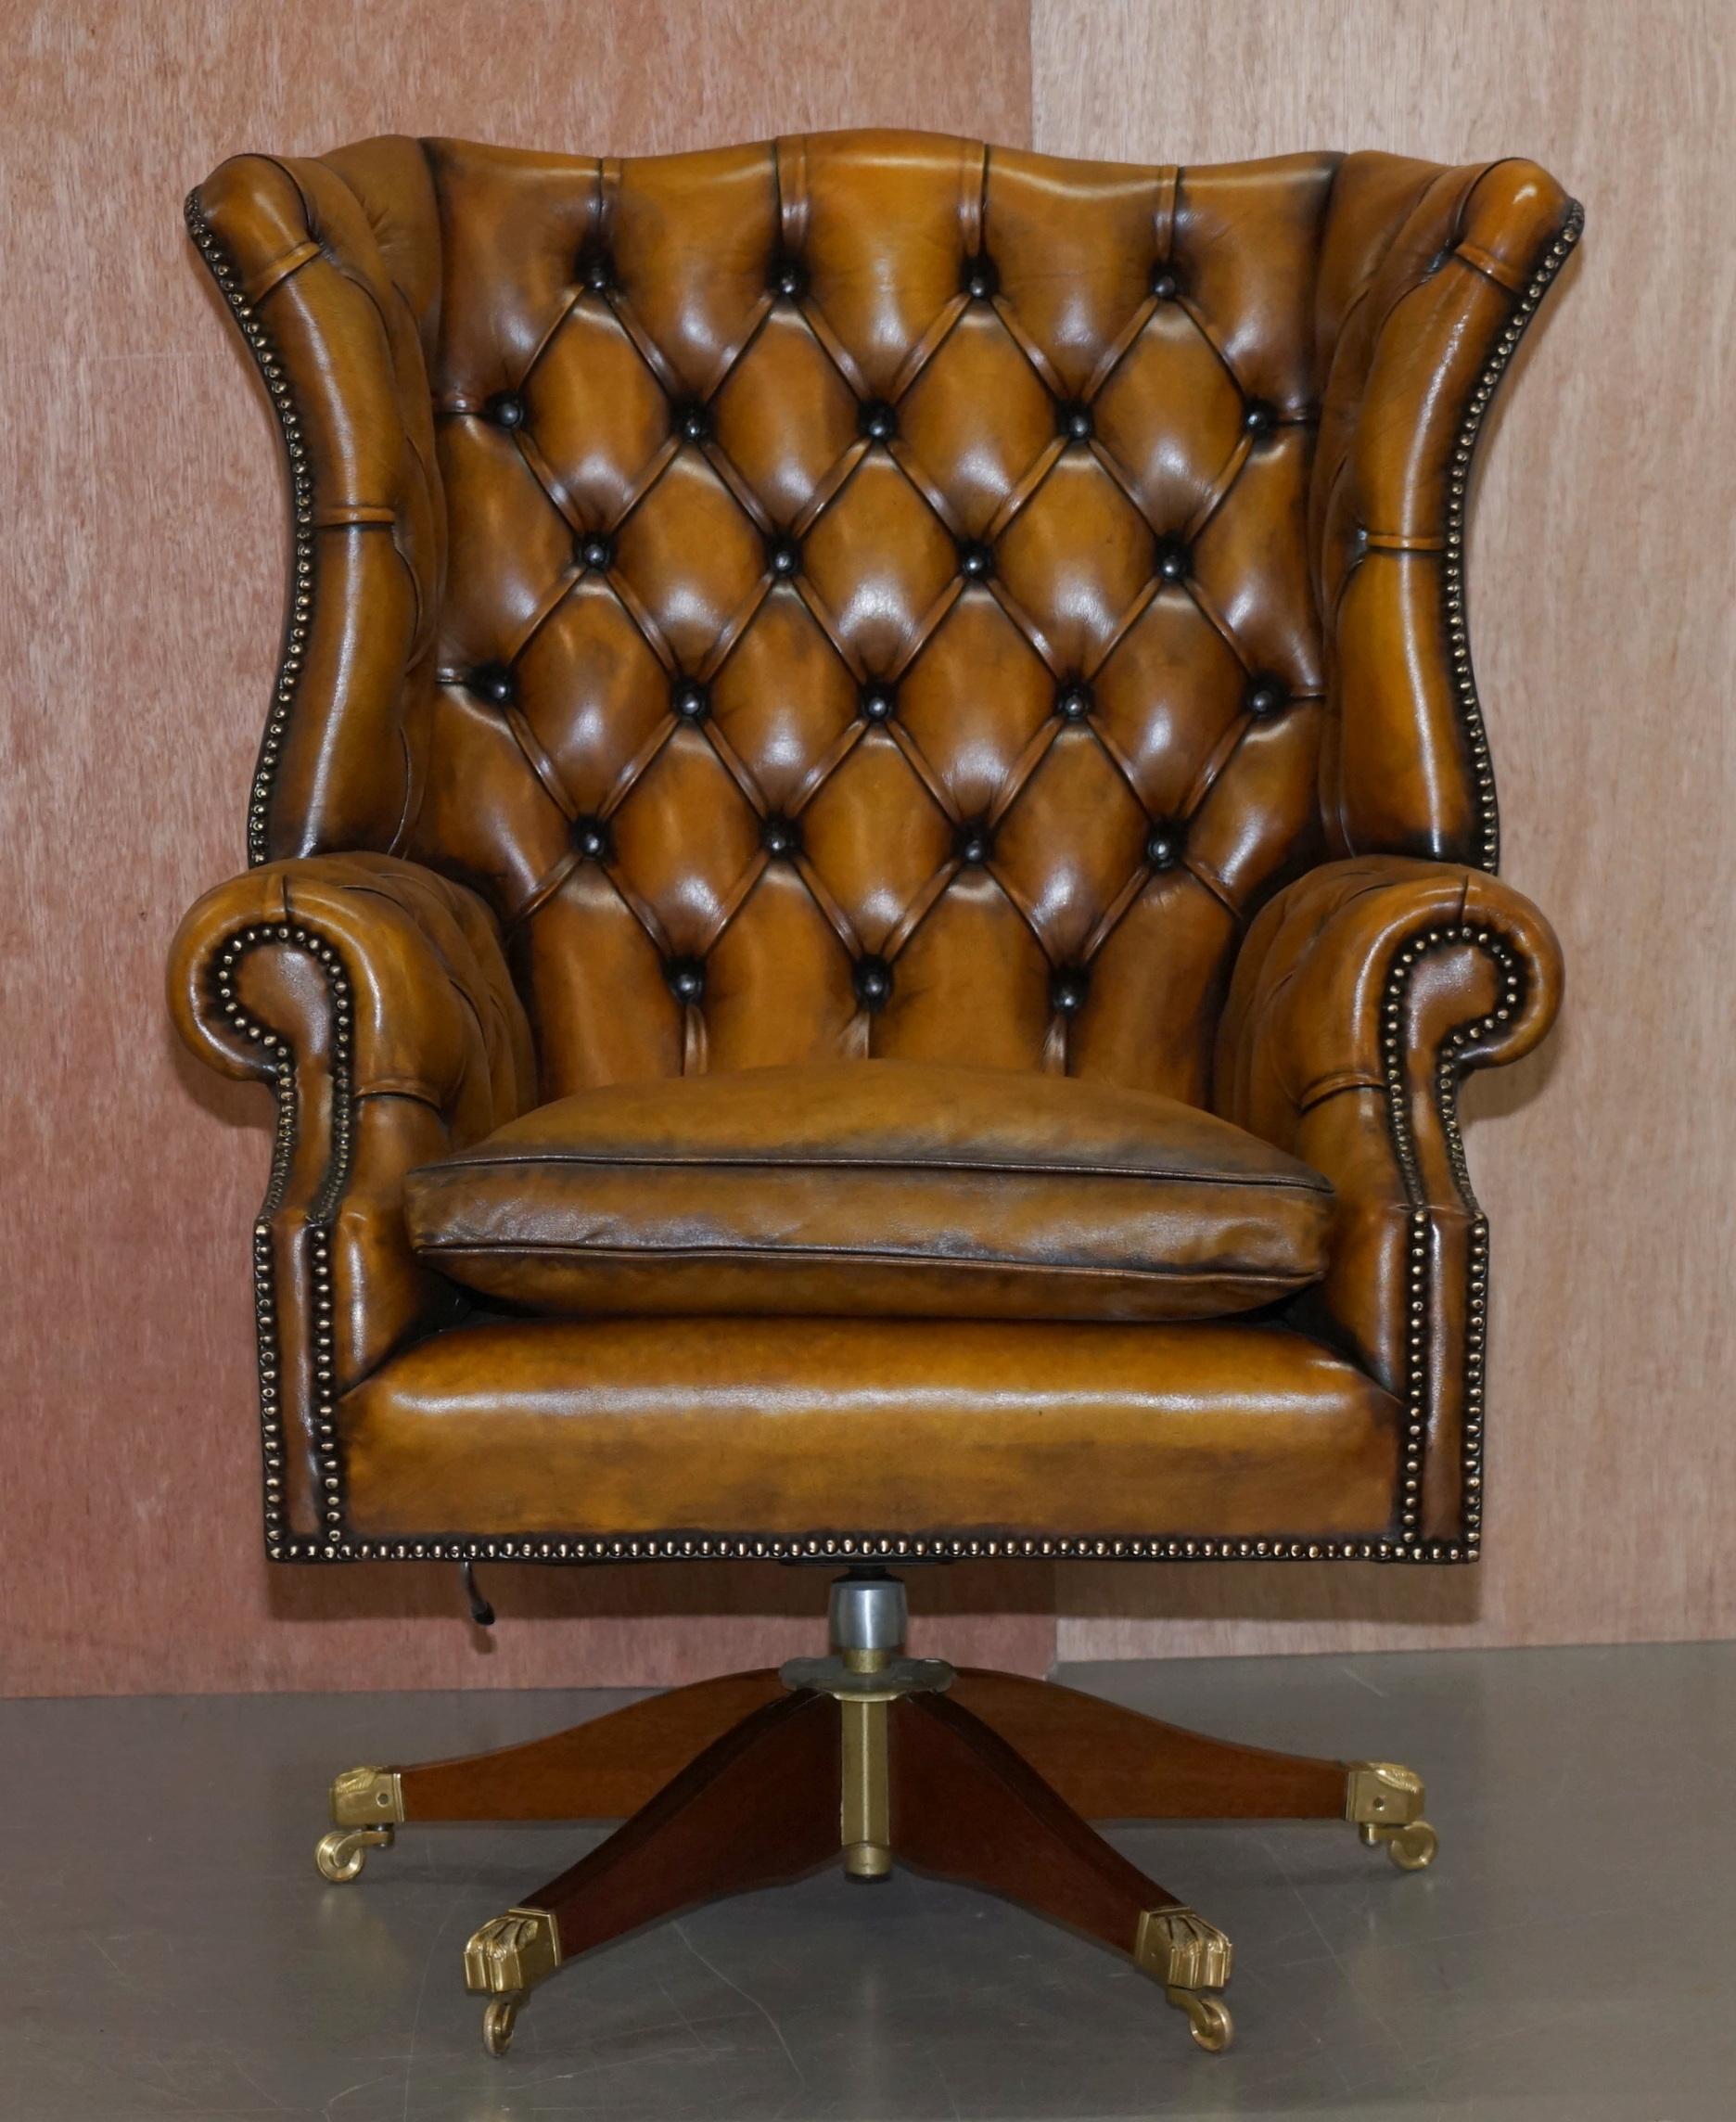 We are delighted to offer for sale this lovely fully restored hand dyed wingback Chesterfield office chair from Harrods London

A stunning and very comfortable chair, it has been fully restored to include being washed back then hand dyed this